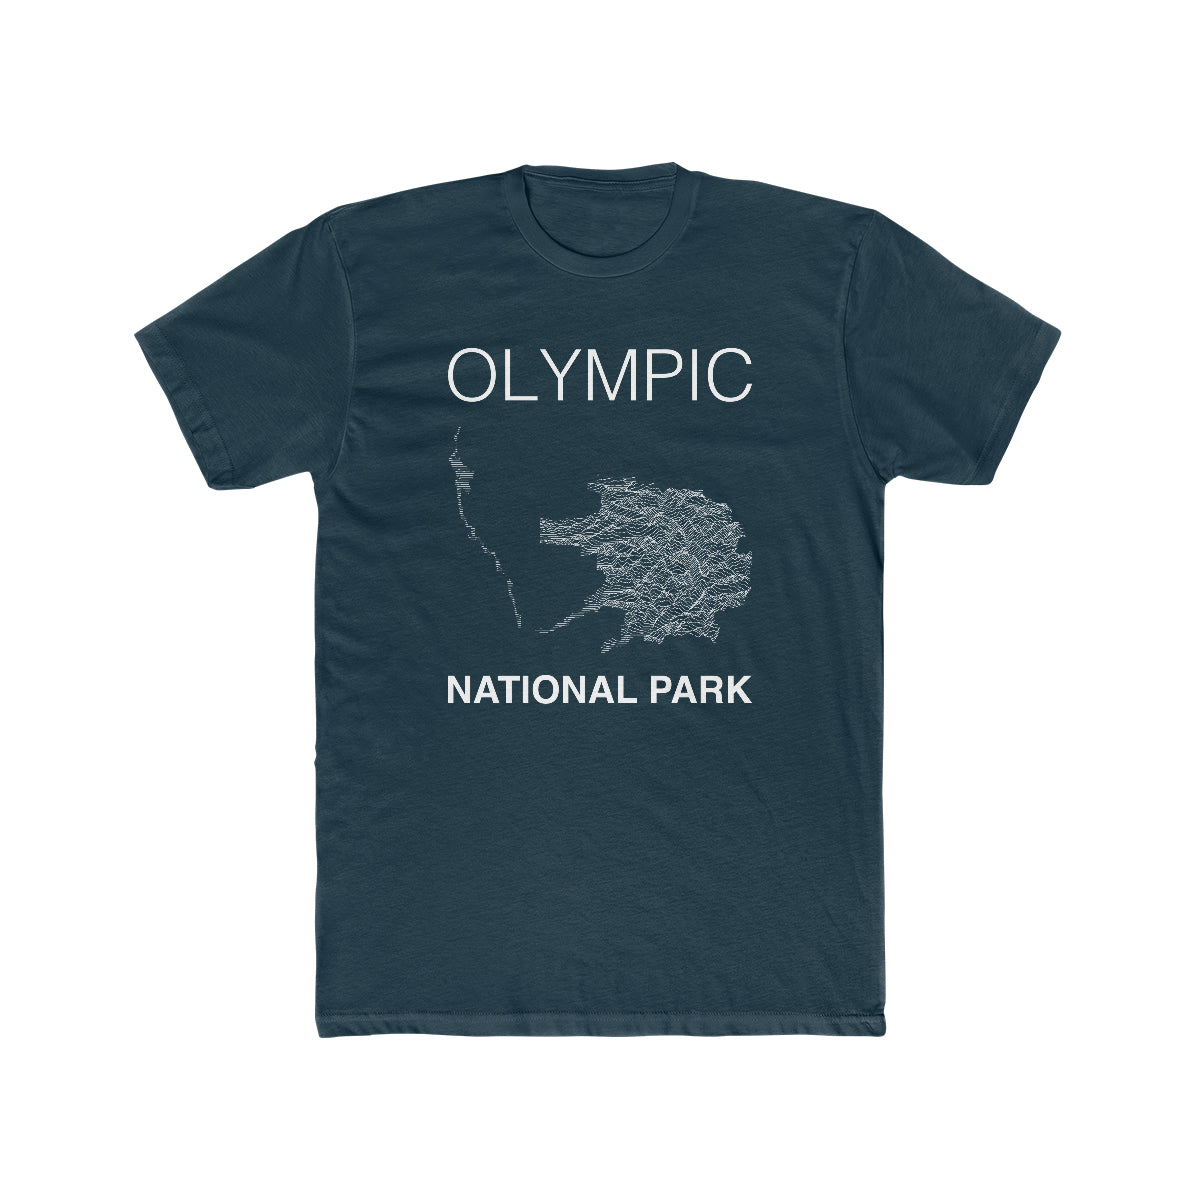 Olympic National Park T-Shirt Lines